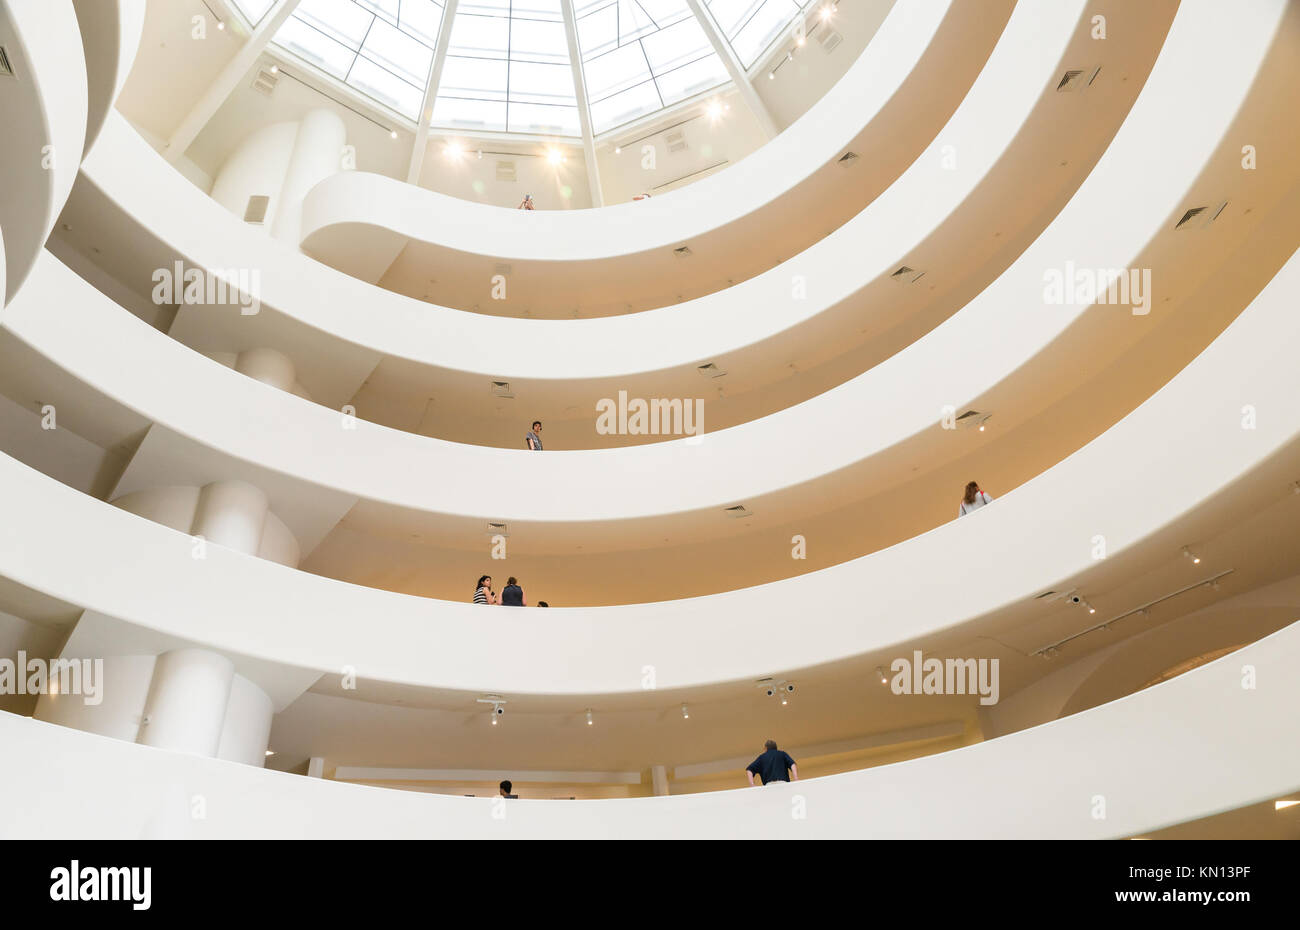 NEW YORK CITY - JULY 10: Interior of the Solomon R. Guggenheim Museum of modern and contemporary art in New York on July 10, 2015. Stock Photo